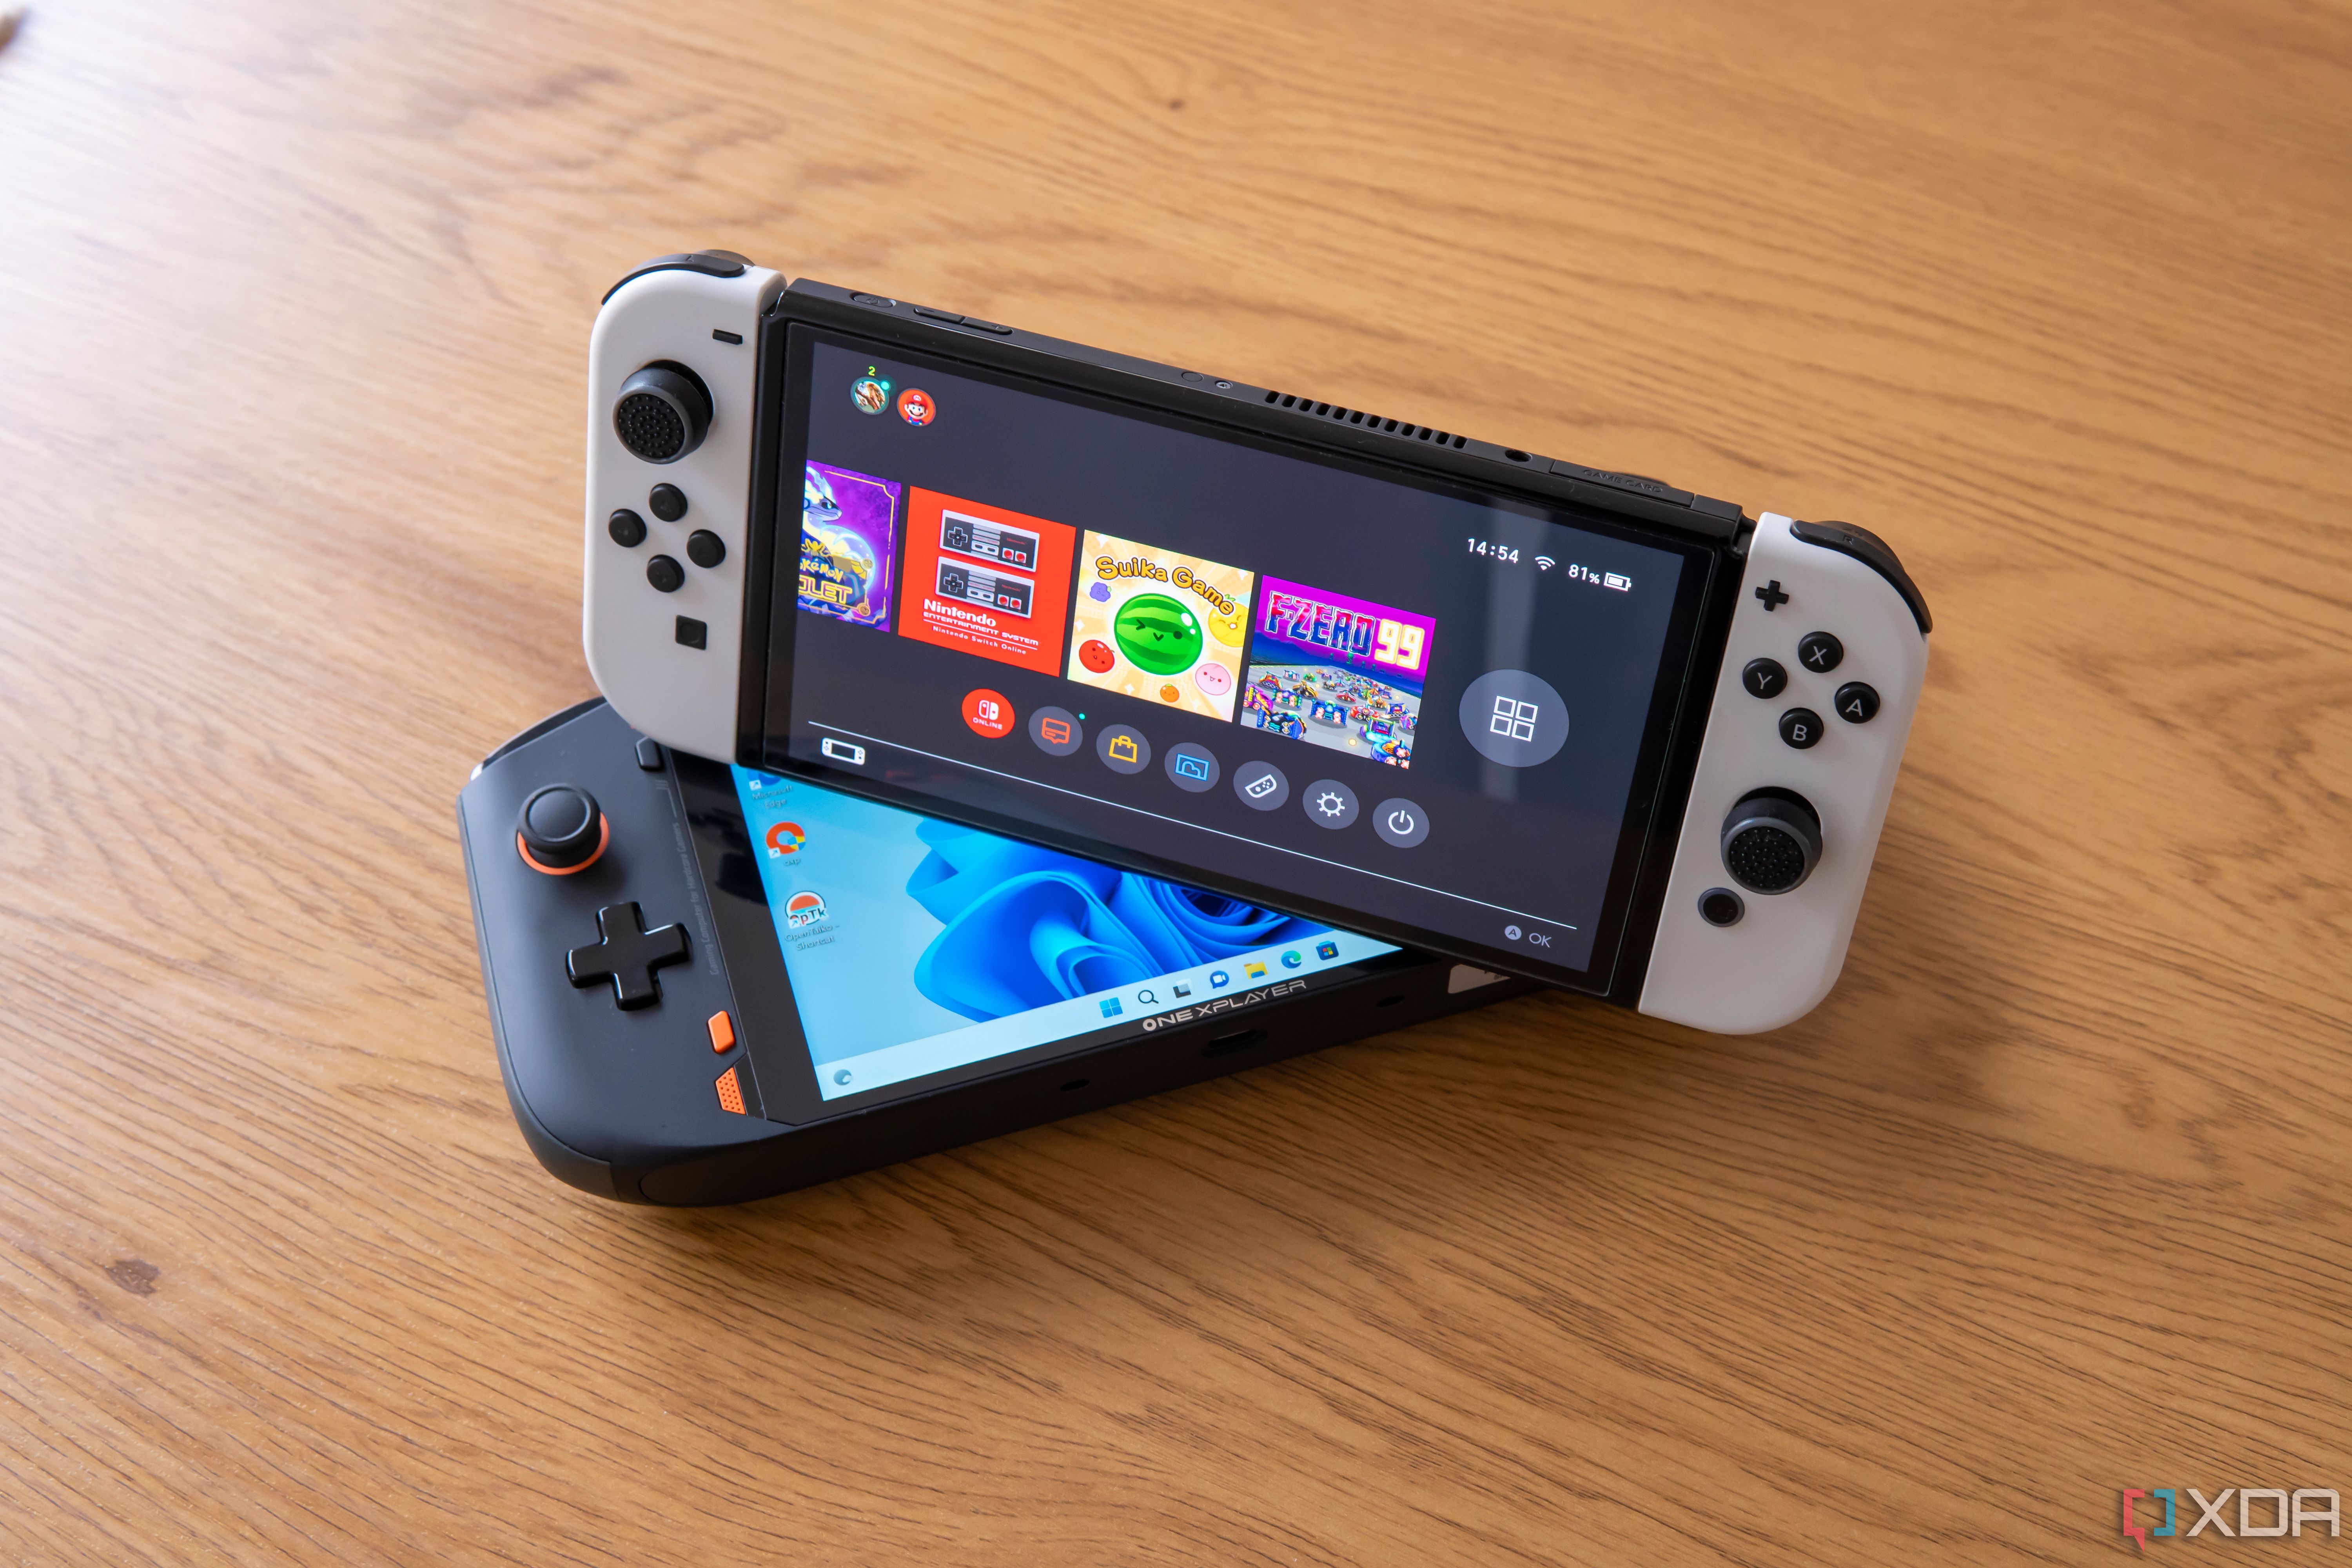 A Nintendo Switch OLED model on top of a One Xplayer Mini pro gaming handheld